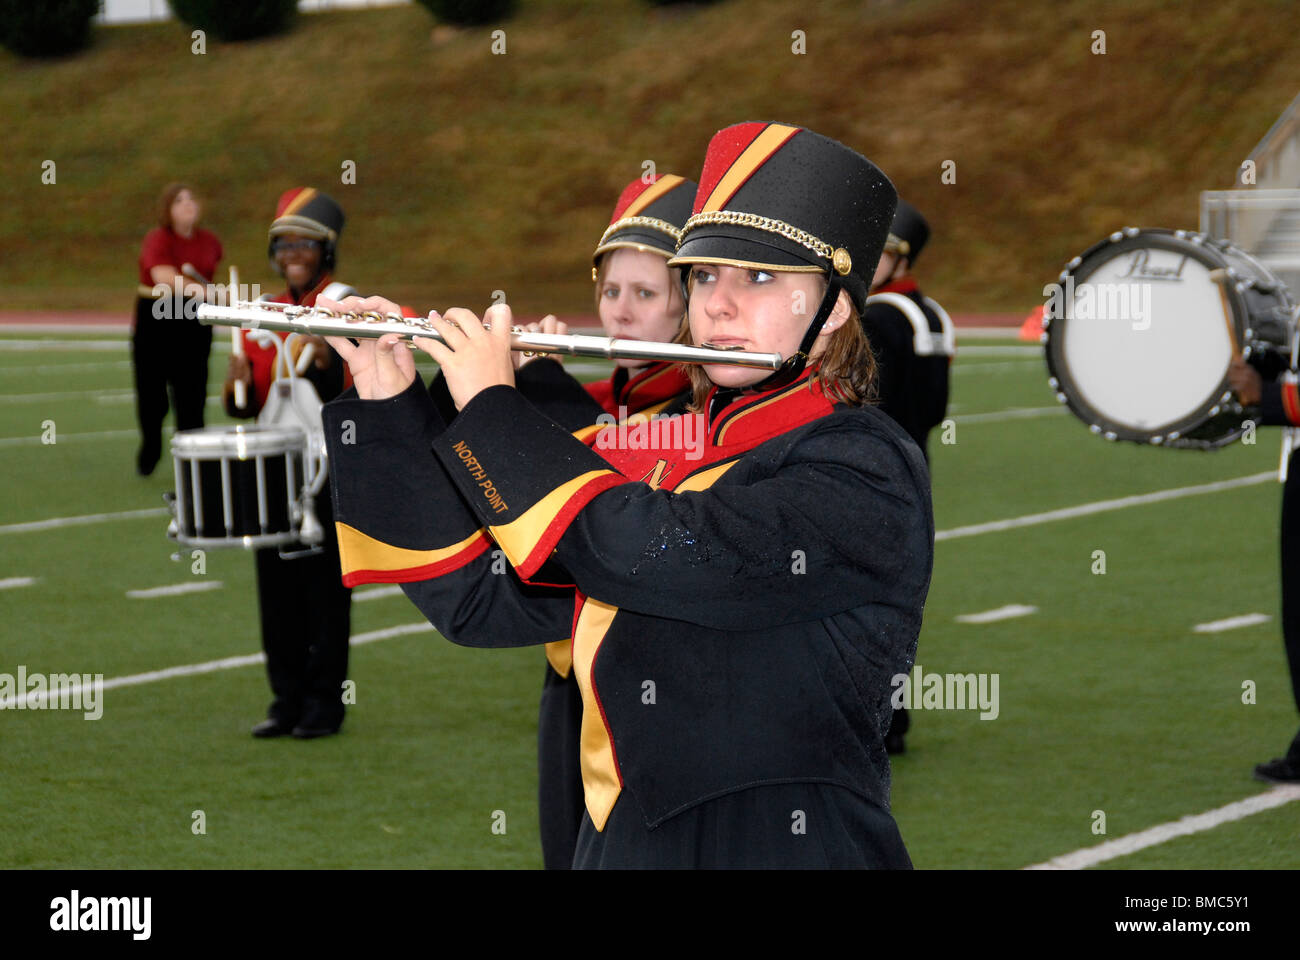 member of a high school marching band playing a flute during a half time show at a high school football game Stock Photo